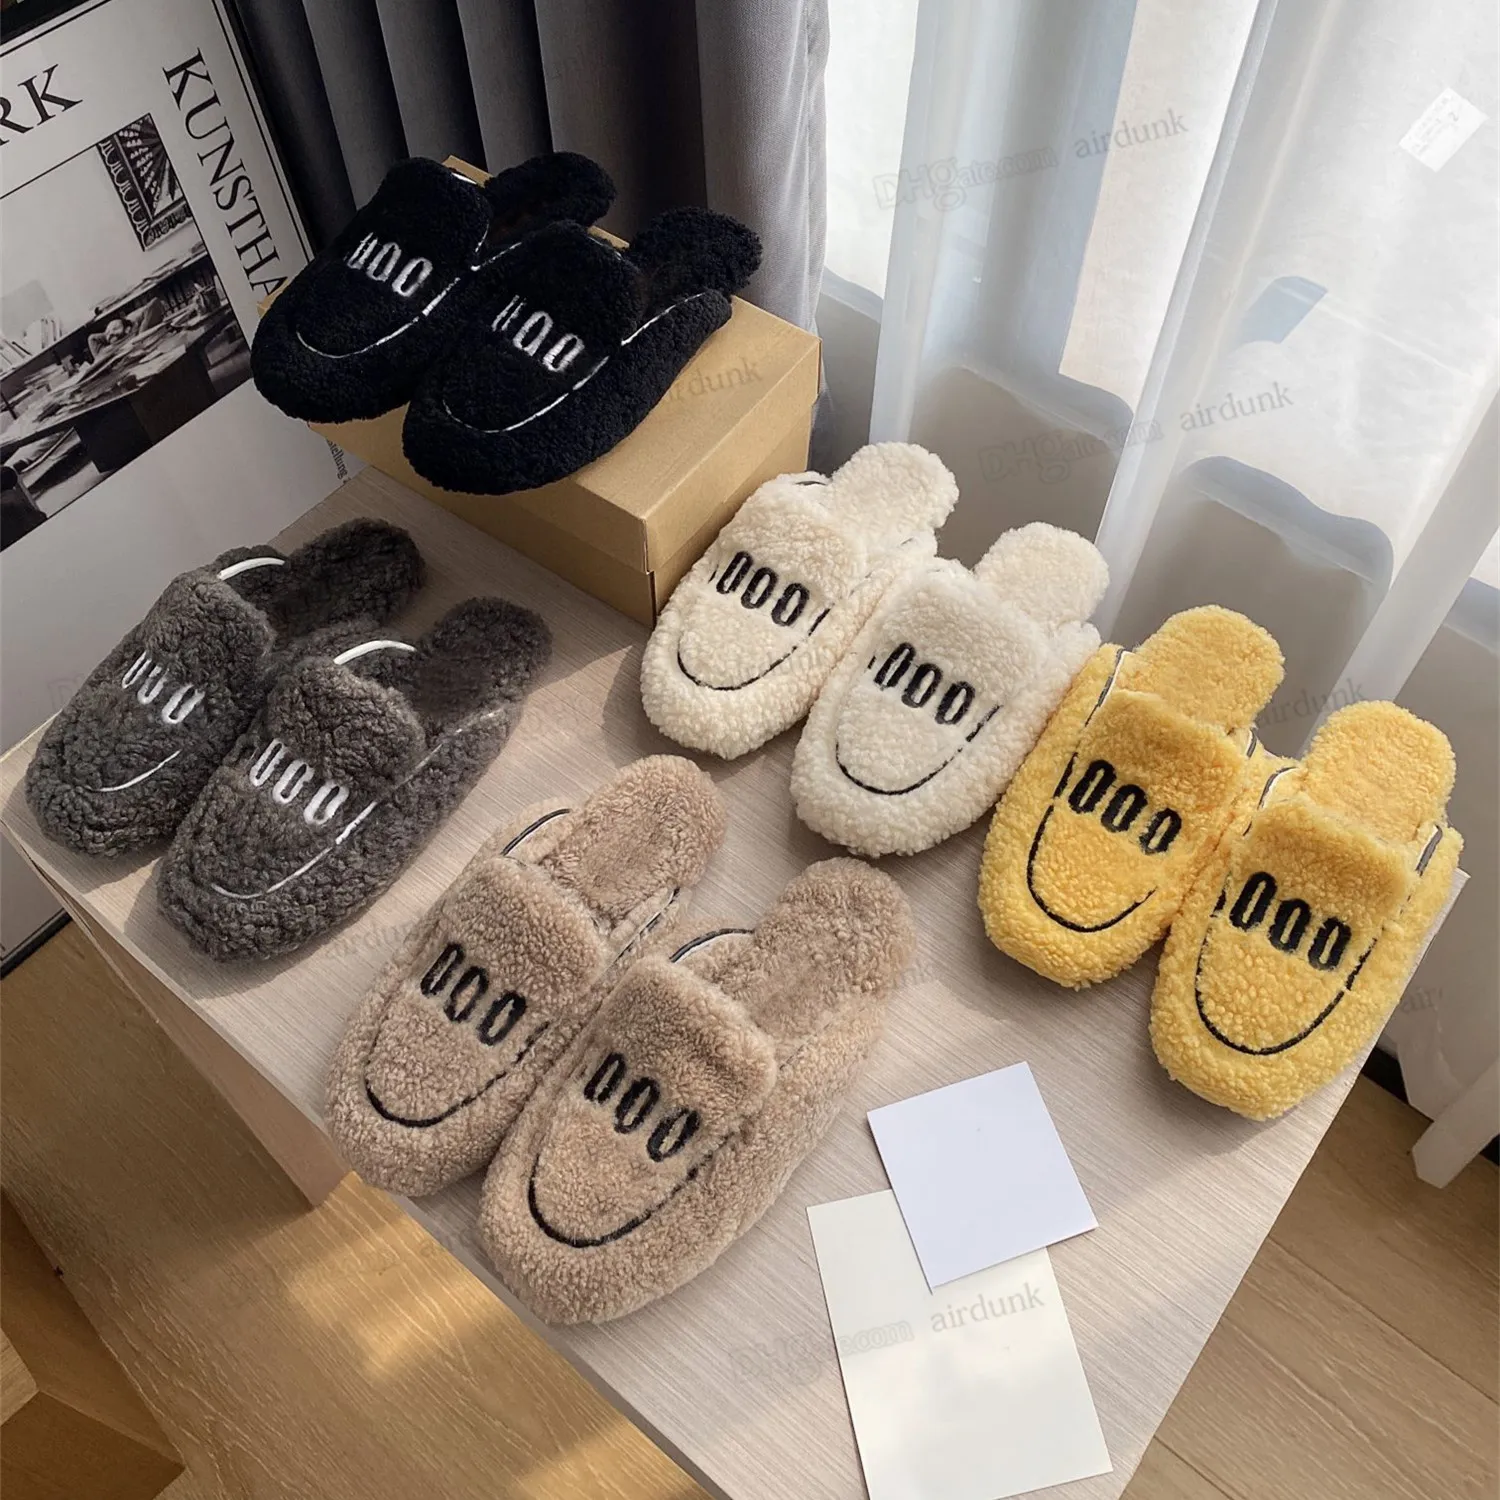 Inside and Fluffy Outside Women New Full Wool Cozy Mules Shoes Embroidery Black White Turmeric Dark Grey Apricot Woman Lazy Muller Slippers Outdoor Slid 99